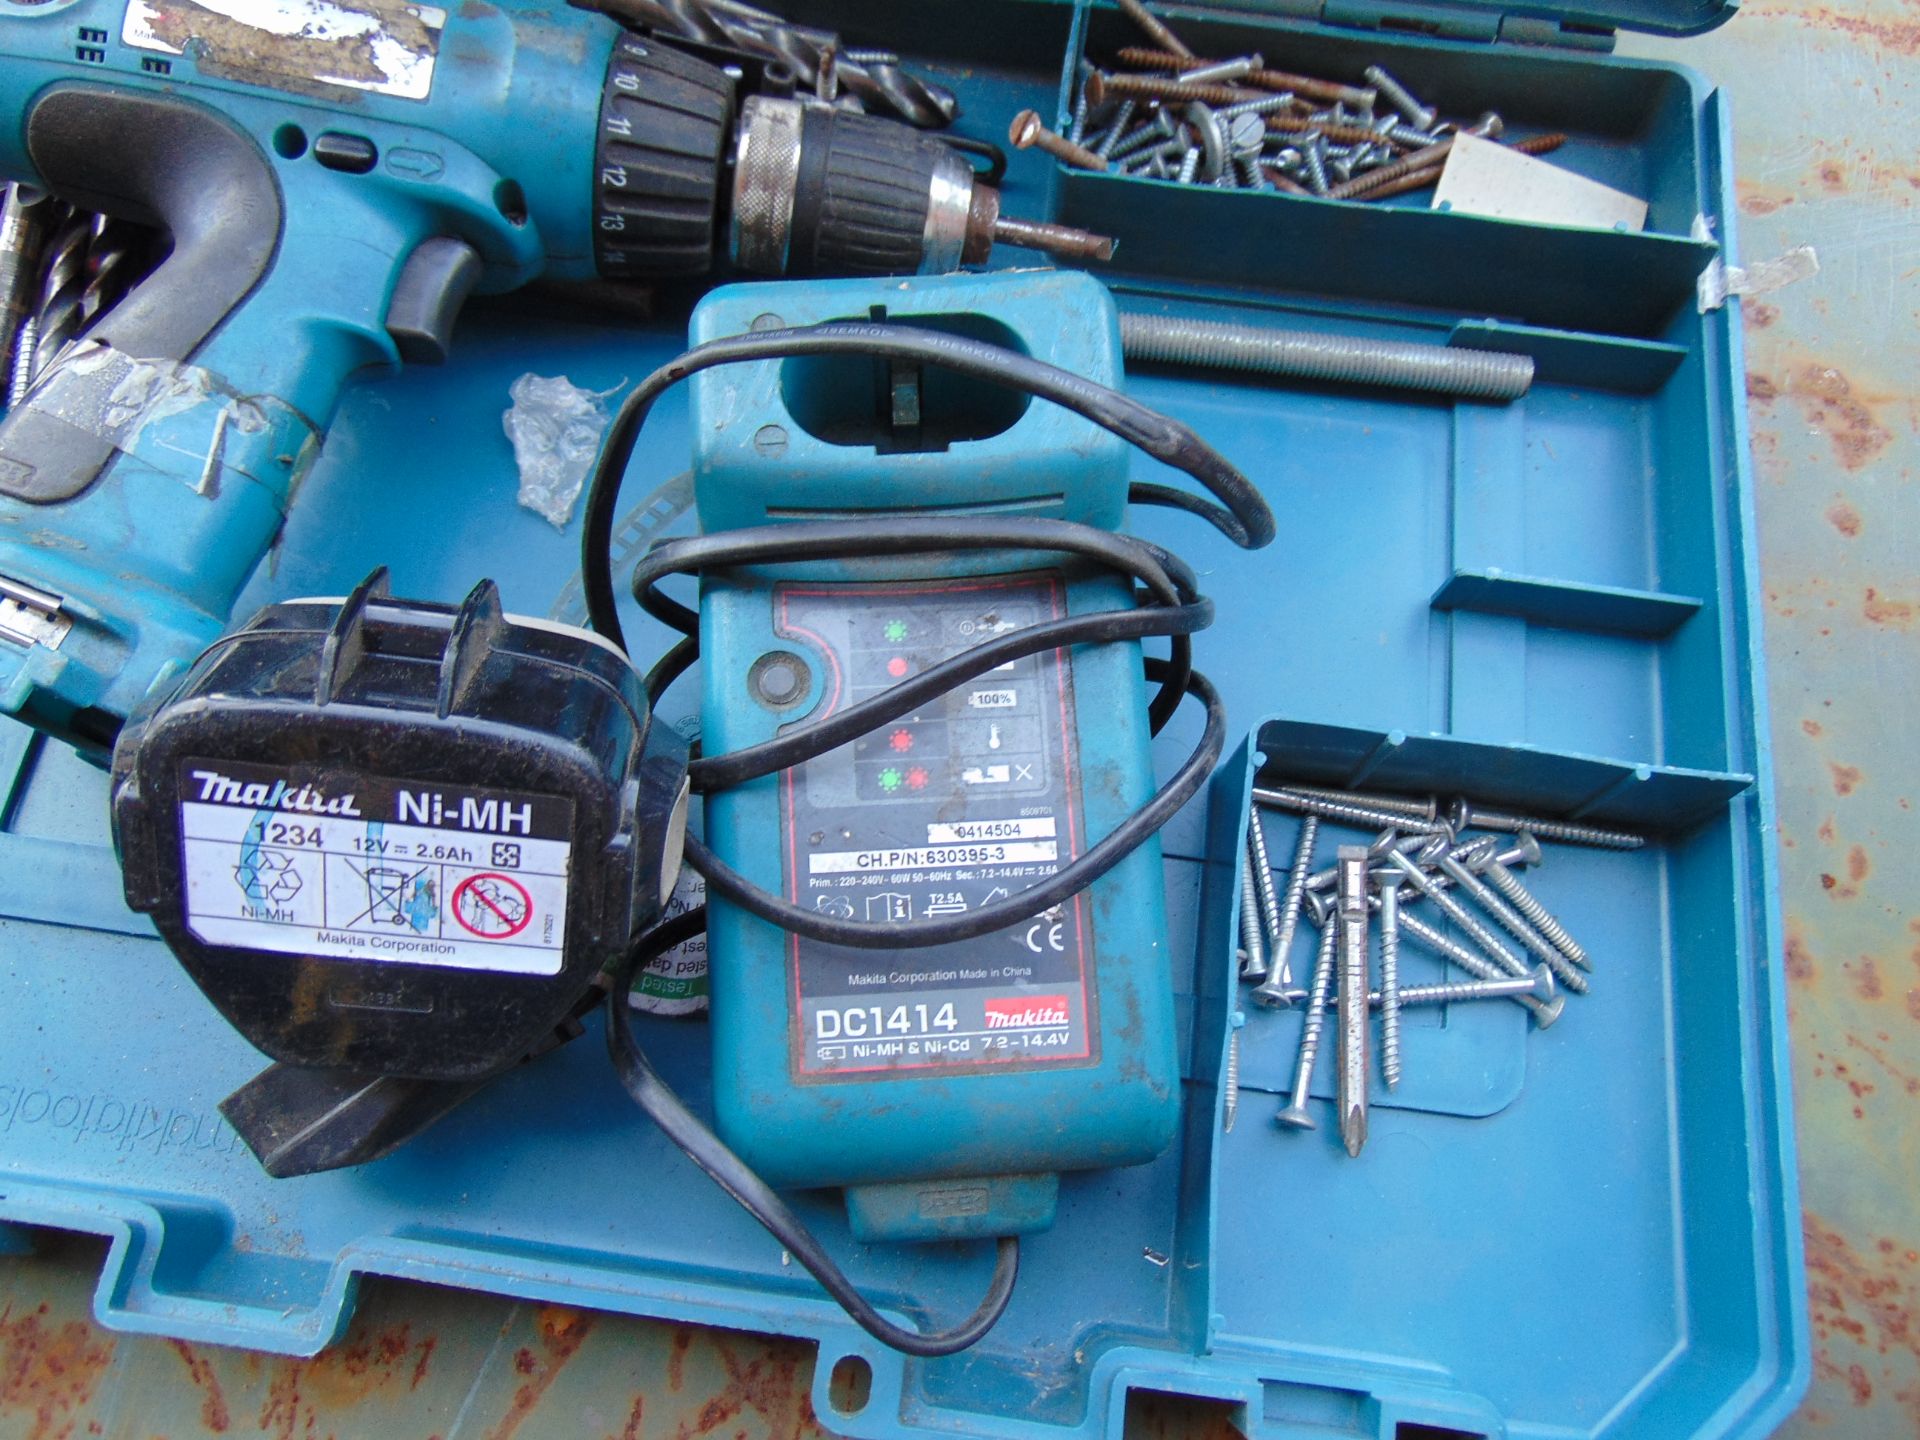 Makita 12 Volt Drill and Charger Drills etc - Image 5 of 7